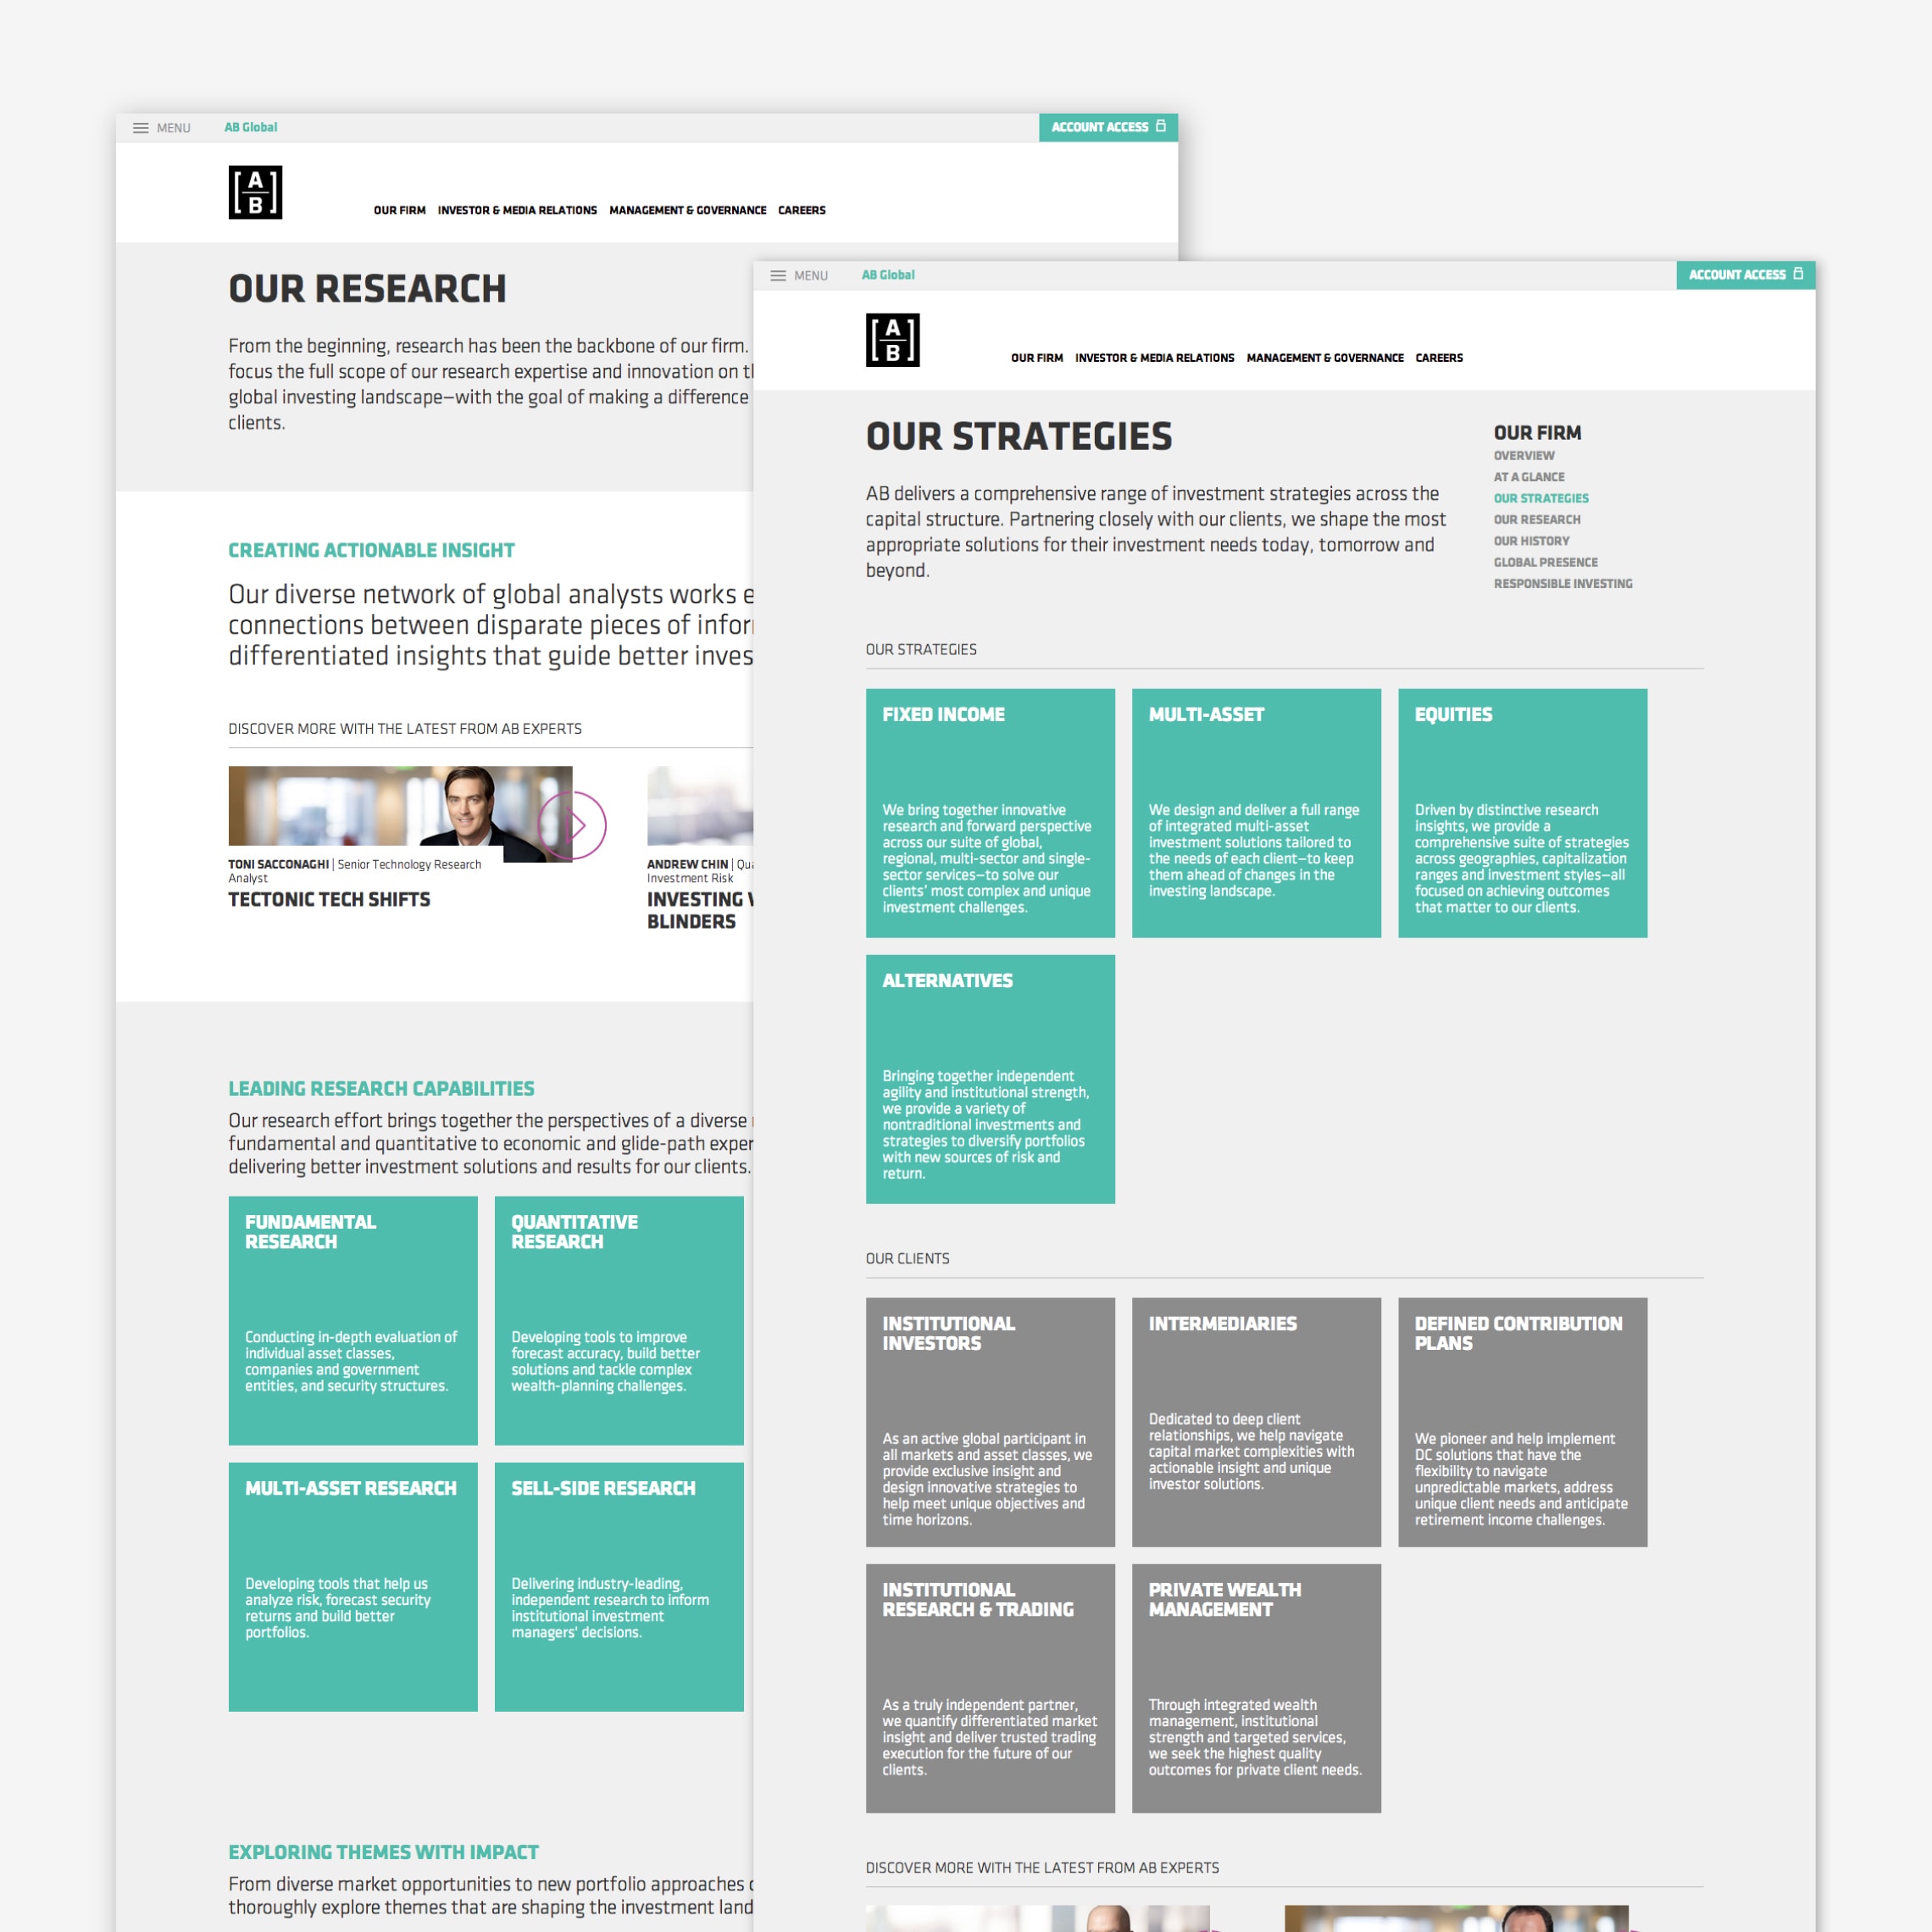 Examples of the new website developed for AB (AllianceBernstein), our research page, and our strategies page.